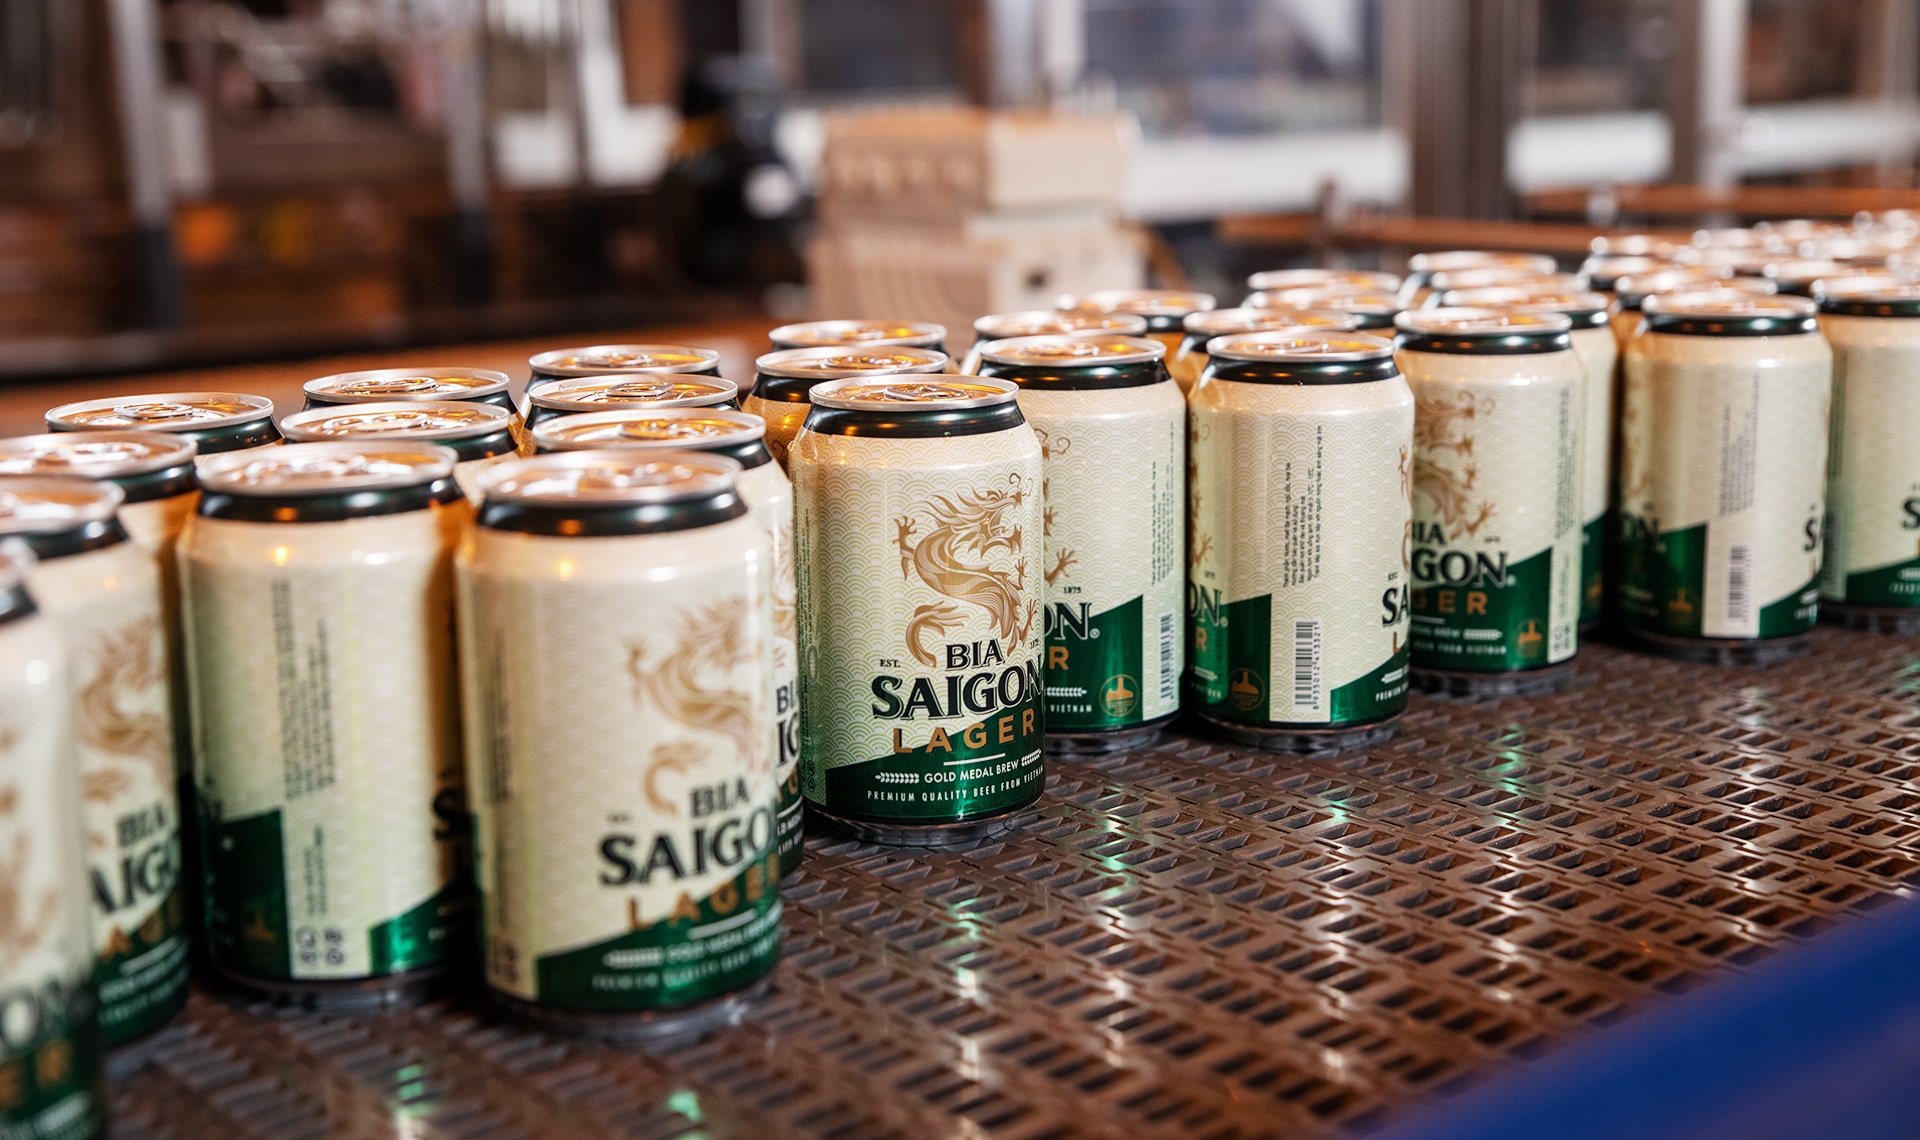 sabeco clears house at international beer awards to take local brand to the world